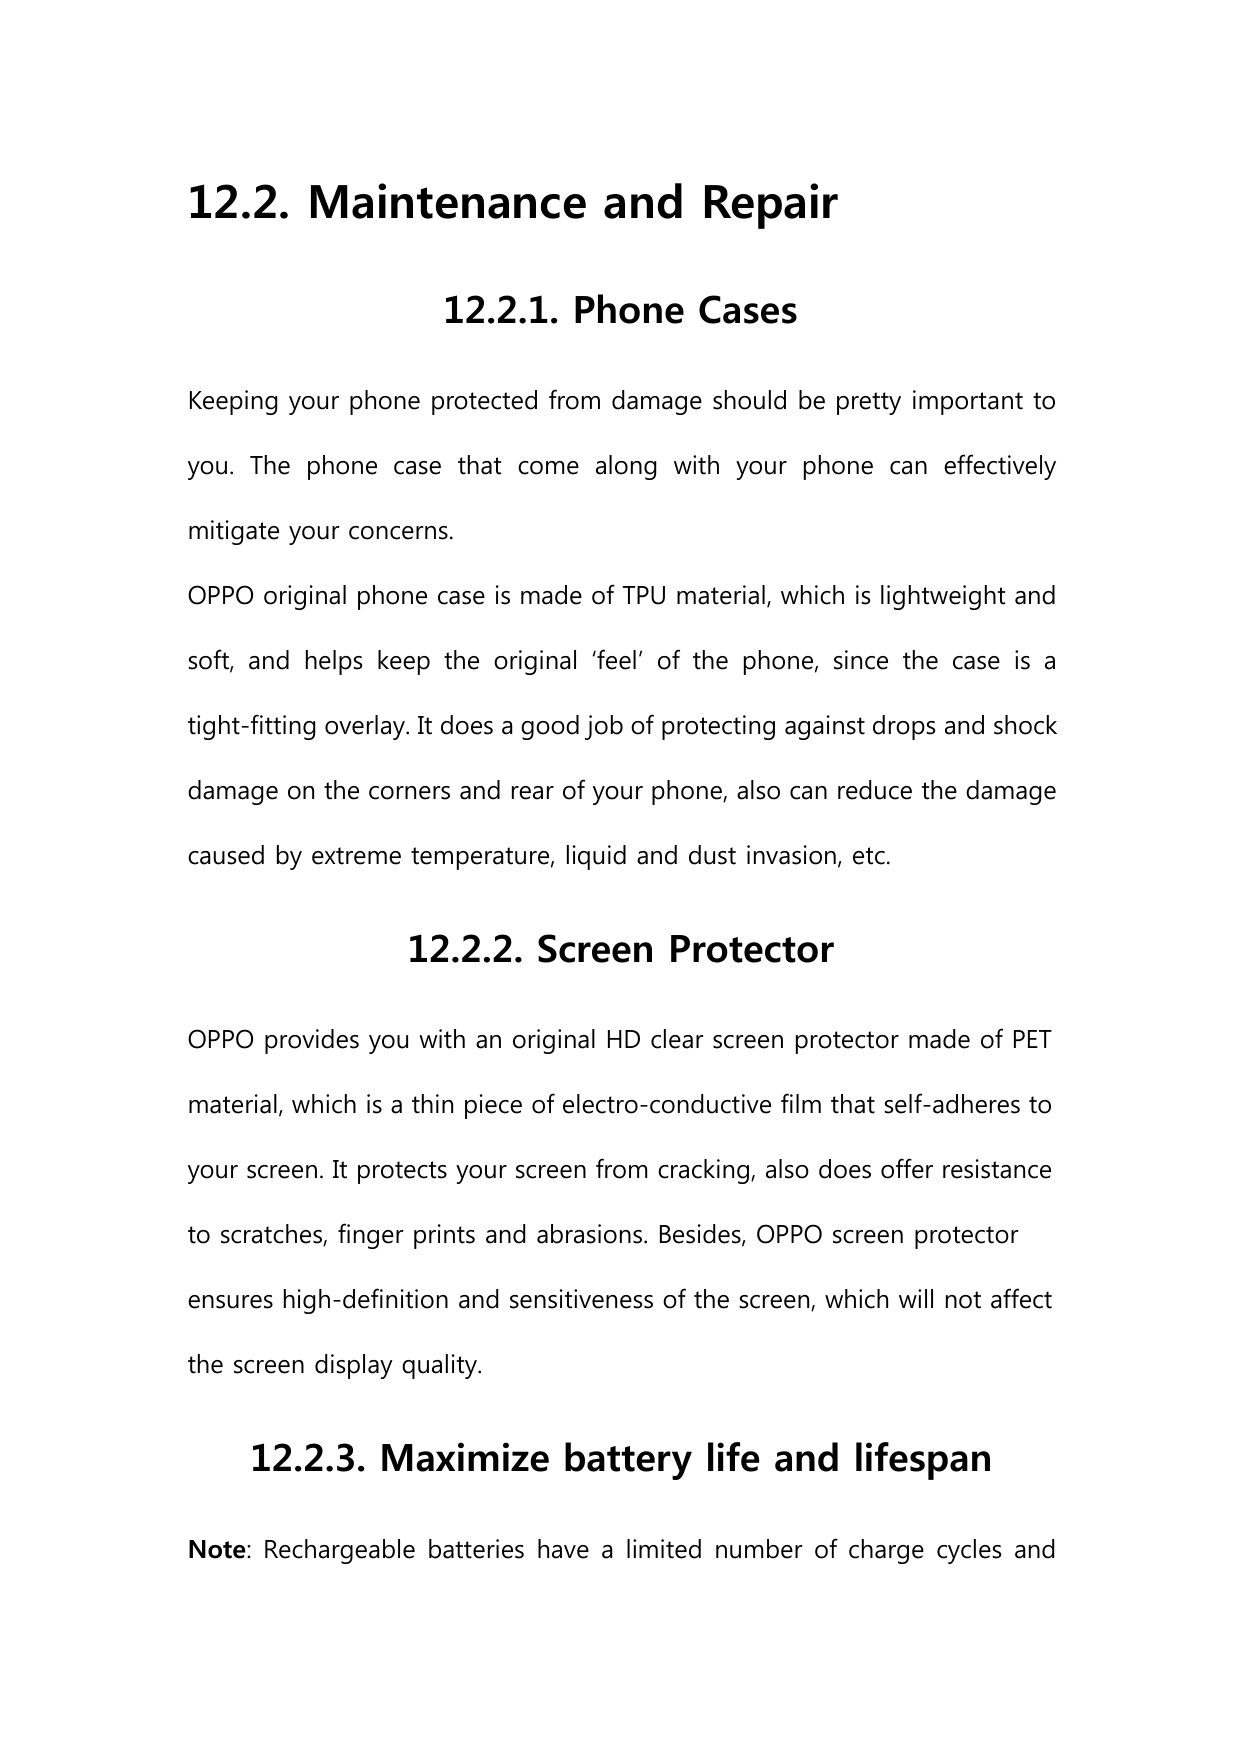 12.2. Maintenance and Repair12.2.1. Phone CasesKeeping your phone protected from damage should be pretty important toyou. The ph